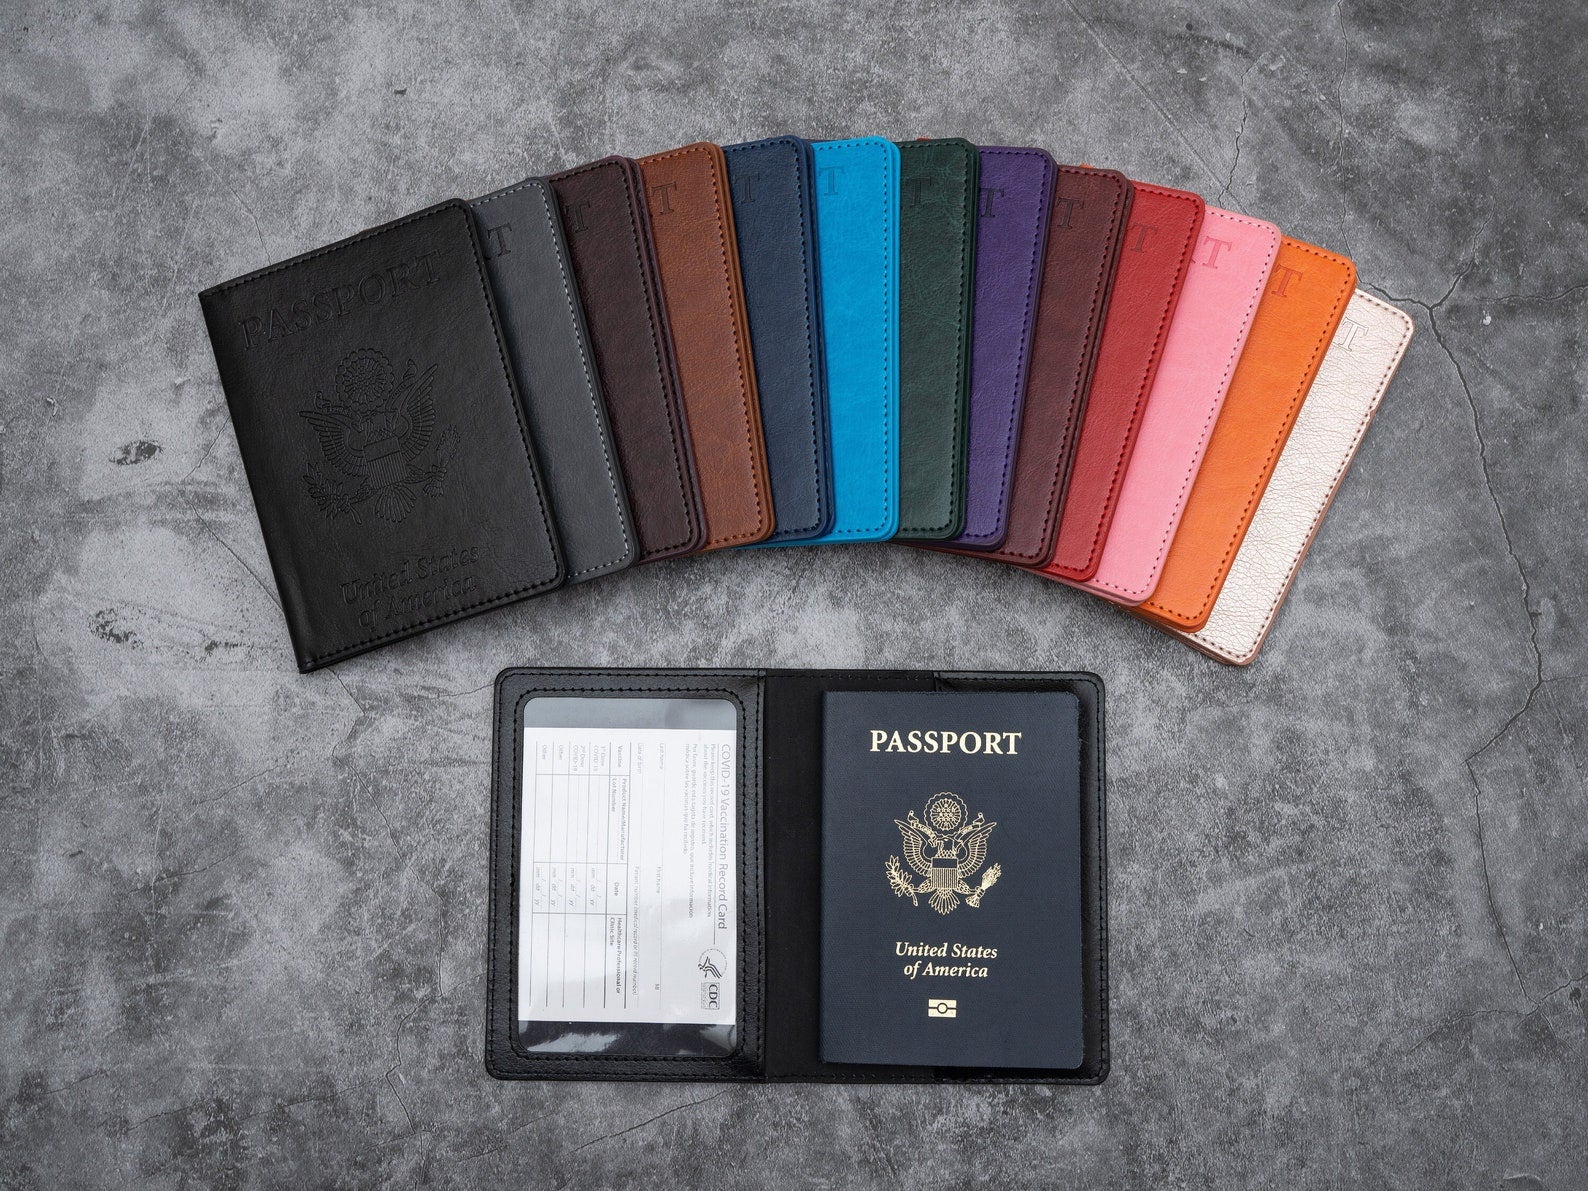 Passport holders in all different colors that open with a slot for your passport and vaccine card